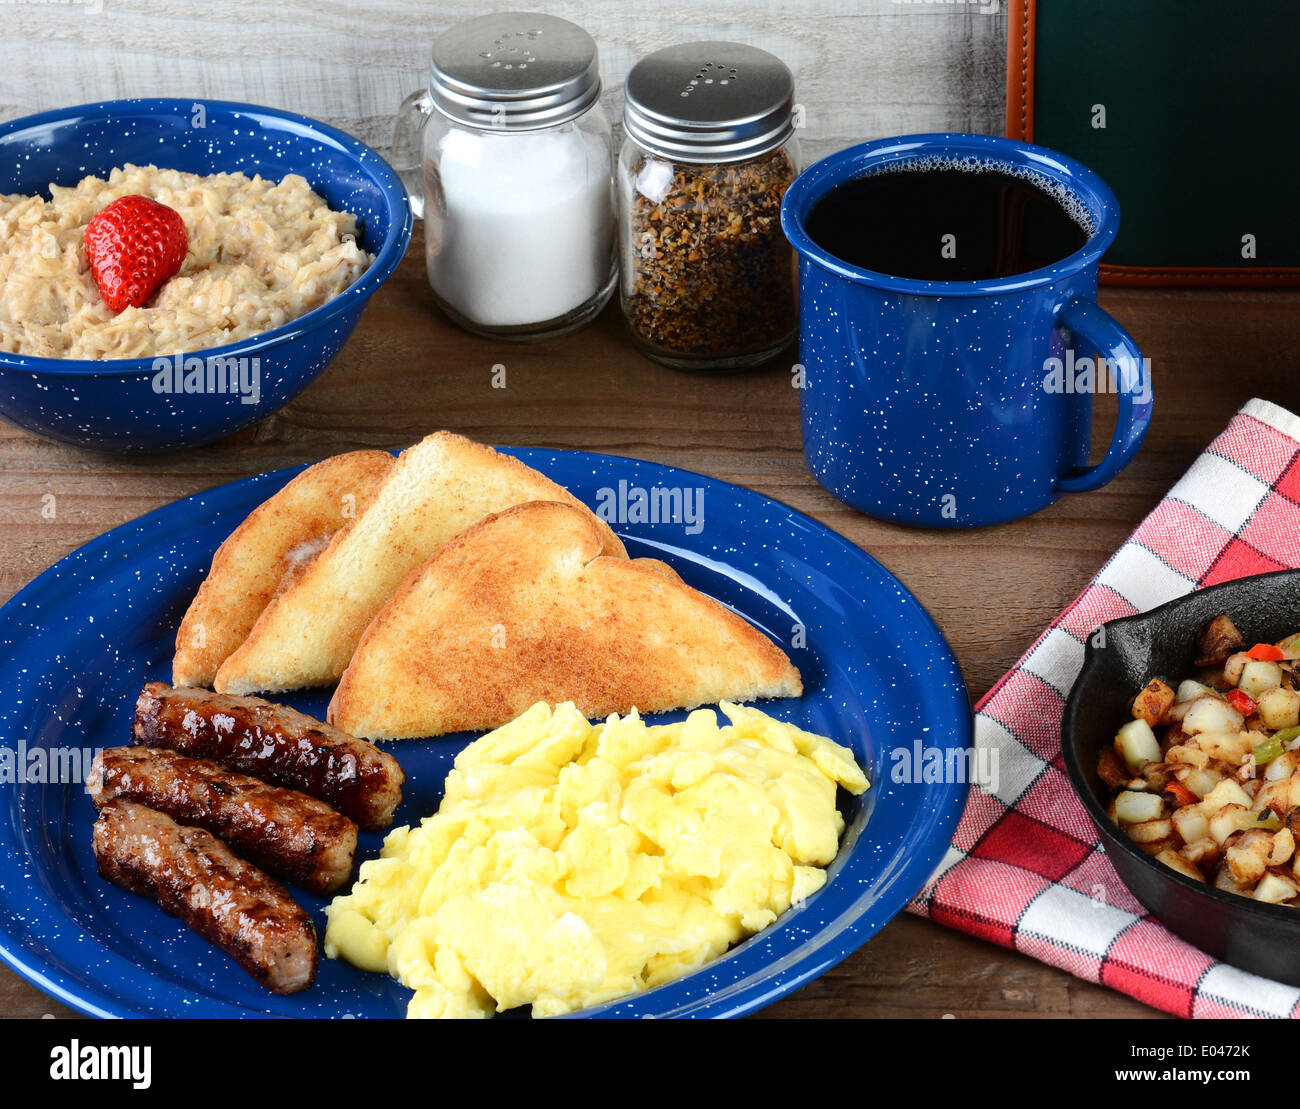 A country style scrambled egg breakfast on a rustic wooden restaurant table. Eggs, sausage links, toast Stock Photo